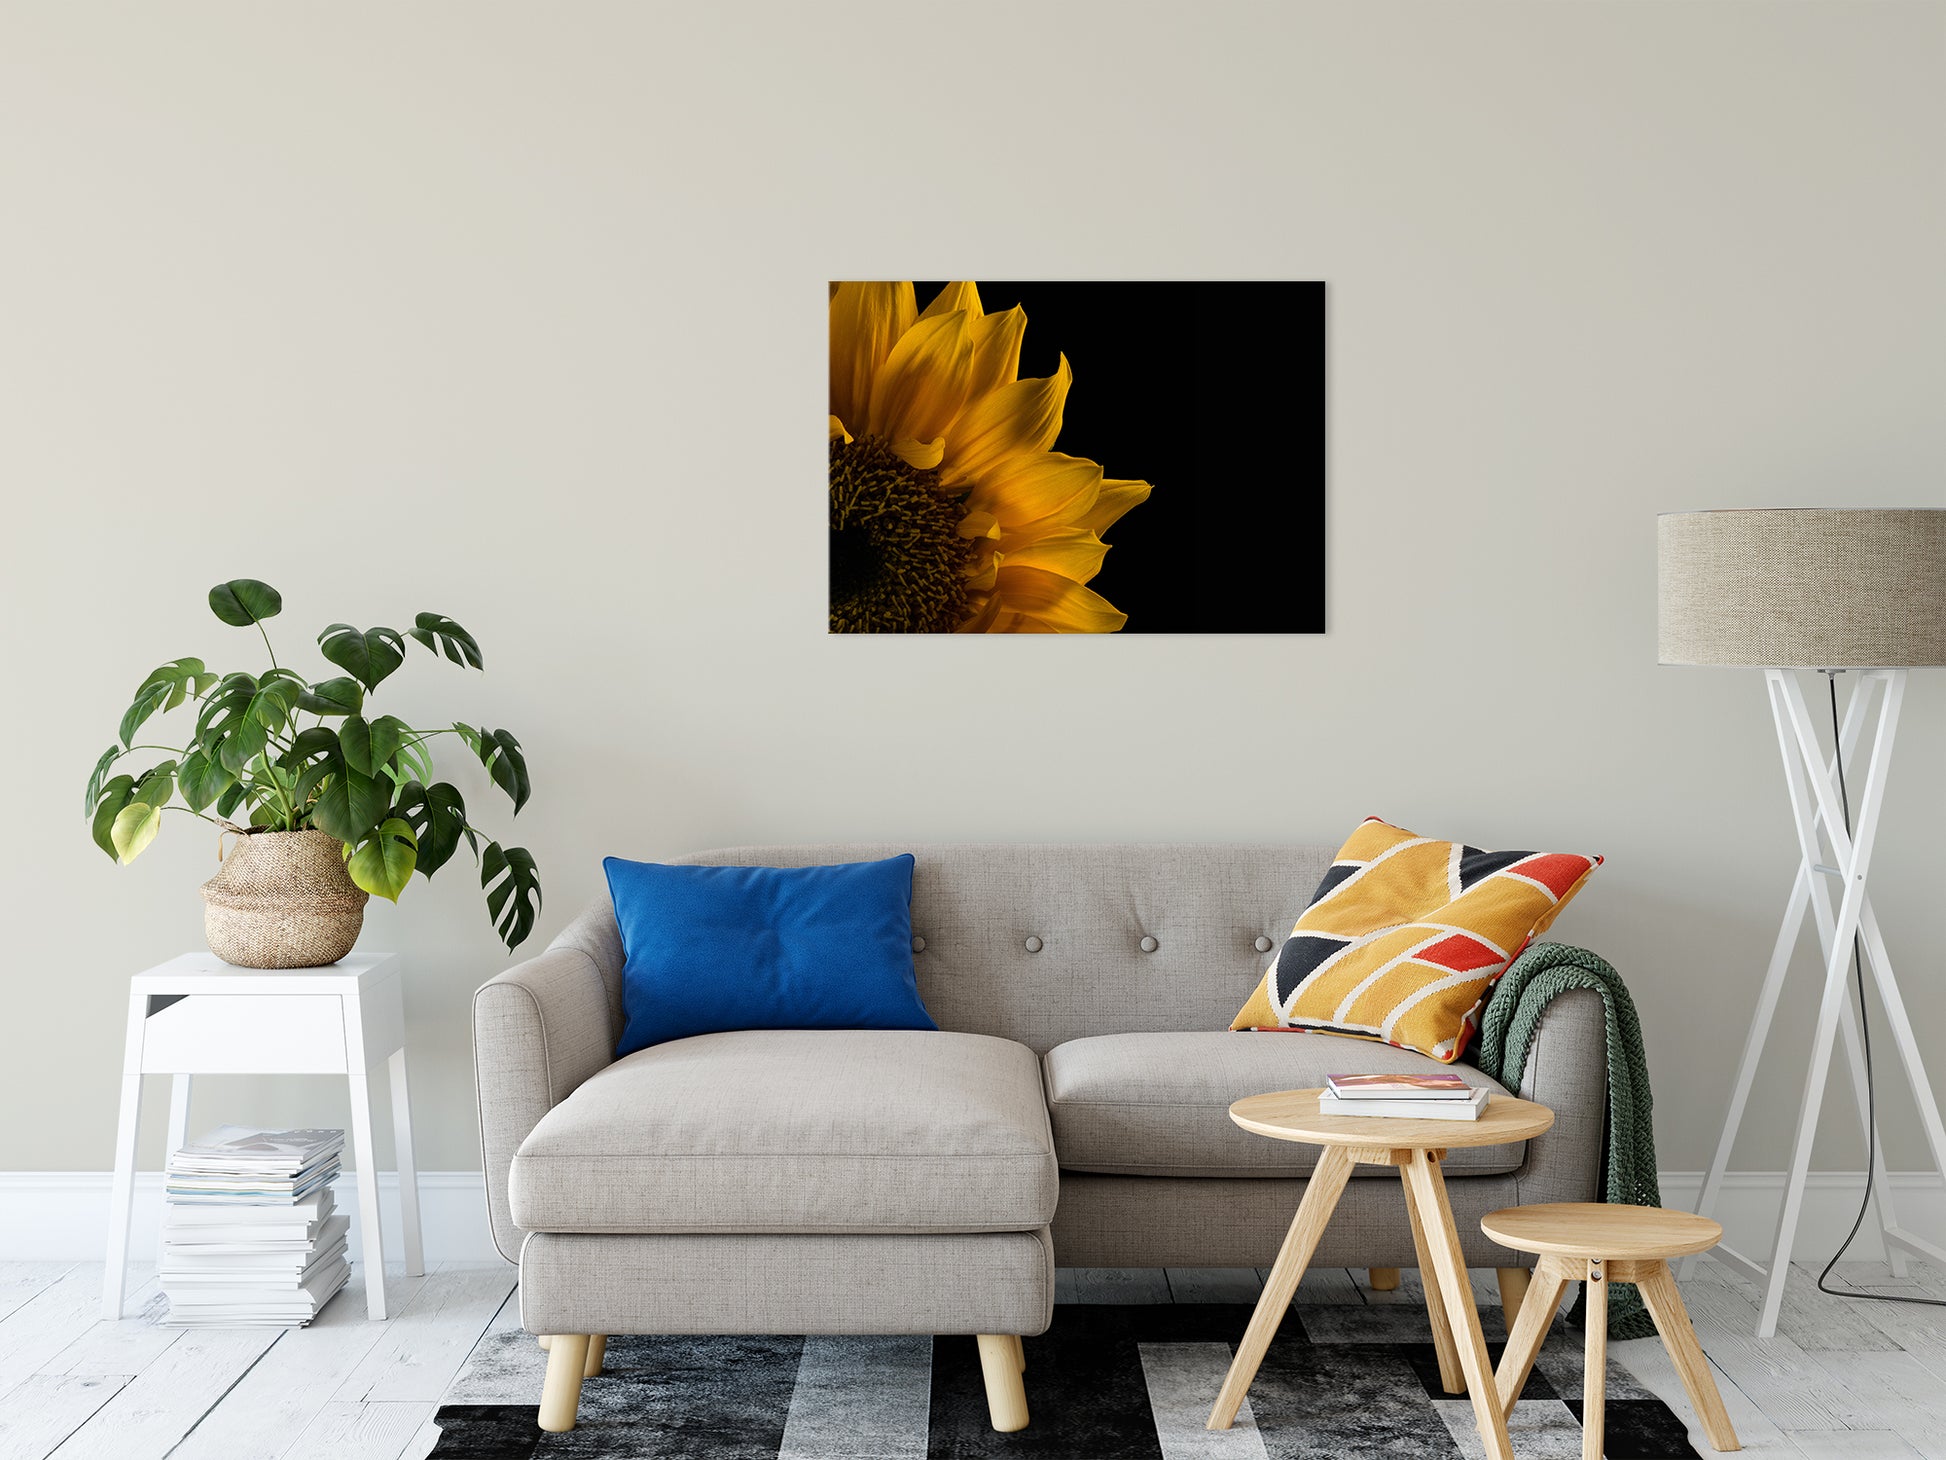 Sunflower in Corner Nature / Floral Photo Fine Art Canvas Wall Art Prints 24" x 36" - PIPAFINEART